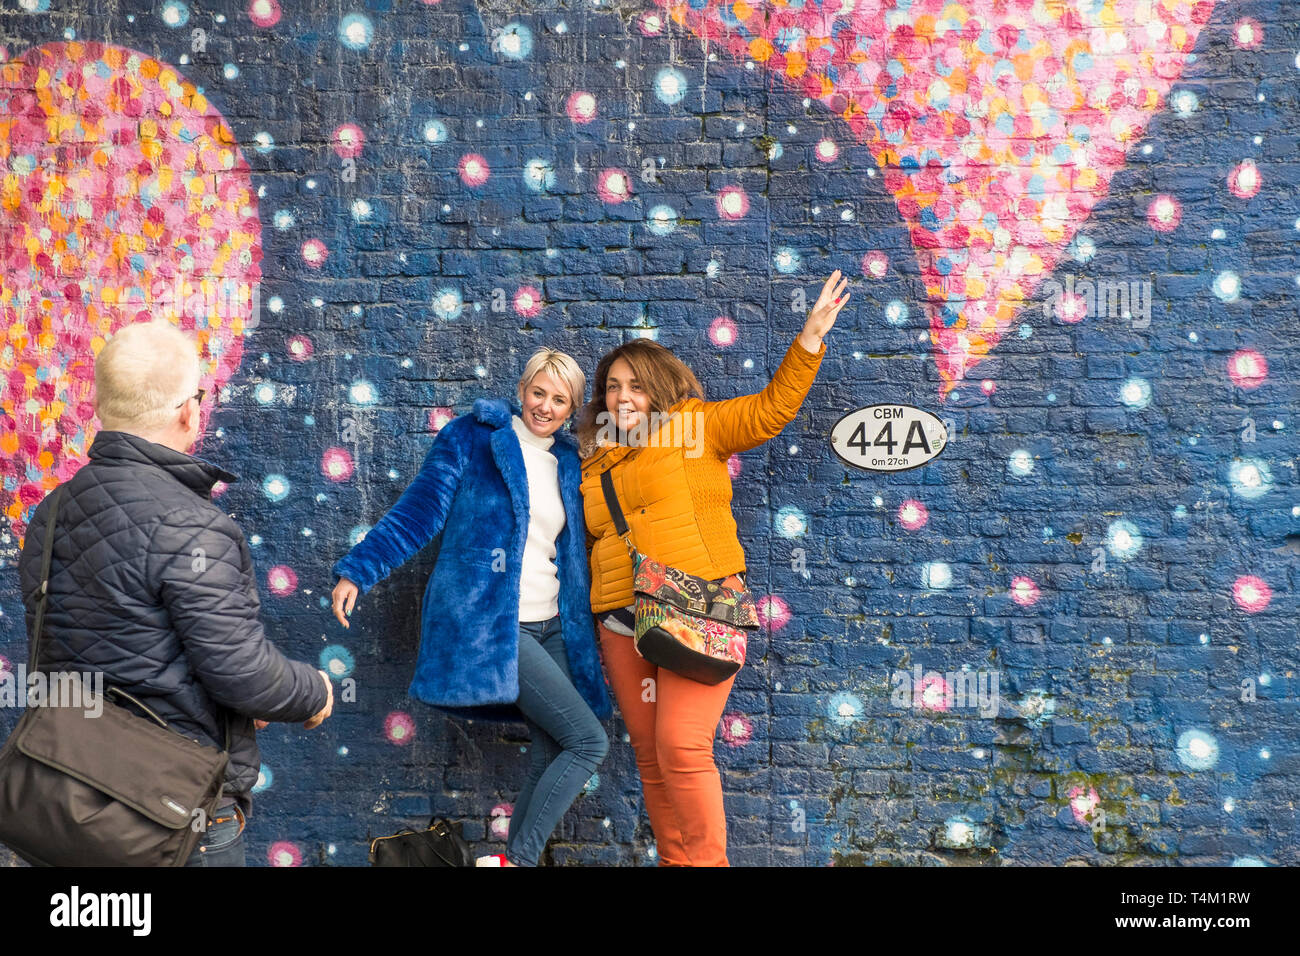 Friends posing for a photograph against a large colourful mural painted on a wall in London. Stock Photo